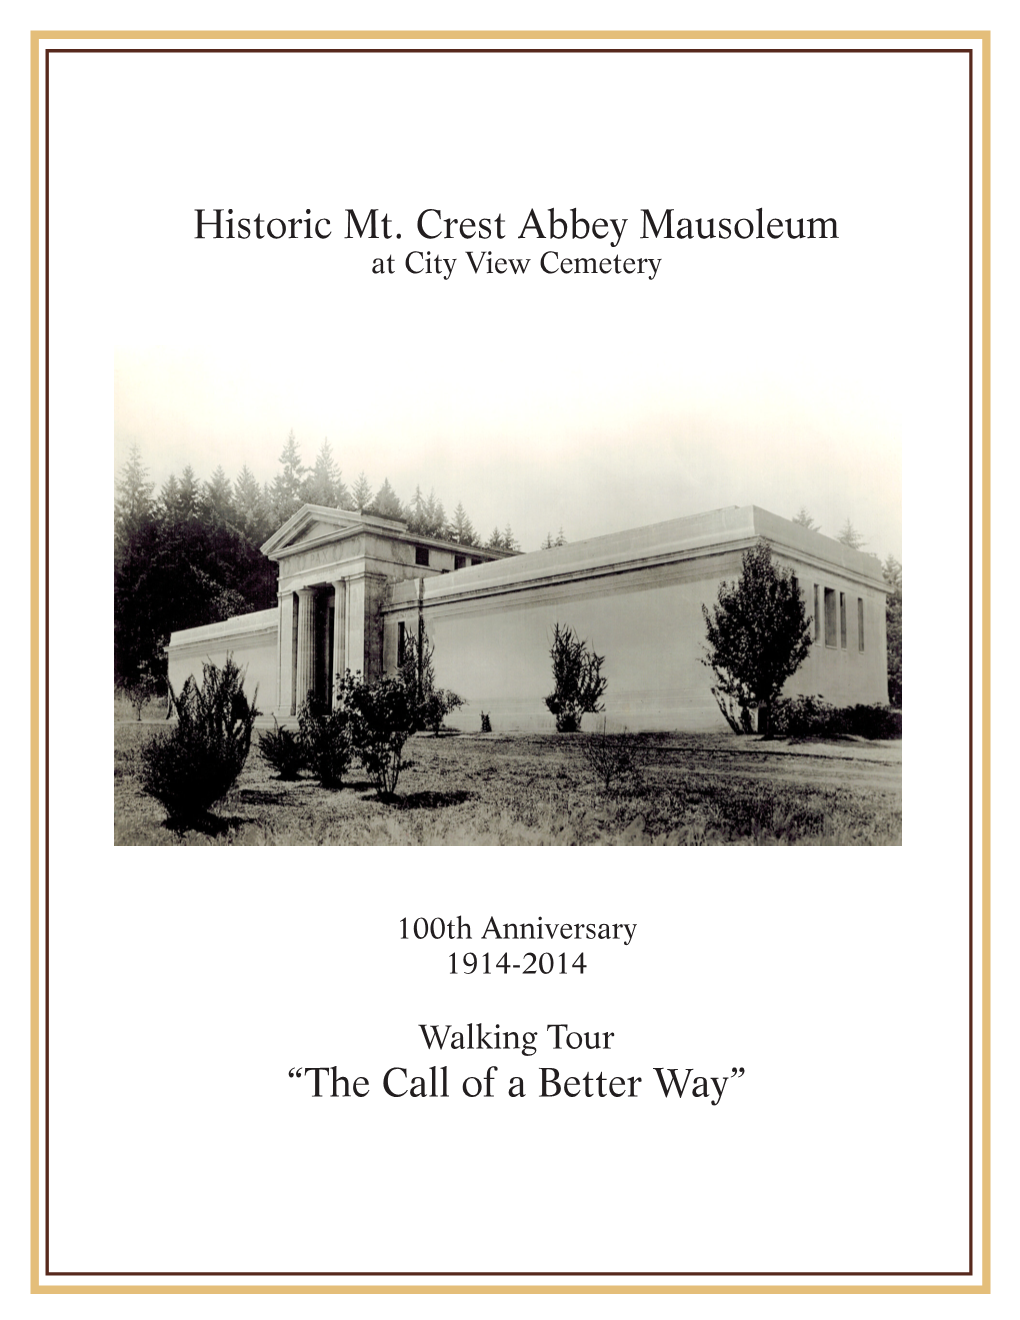 Historic Mt. Crest Abbey Mausoleum “The Call of a Better Way”